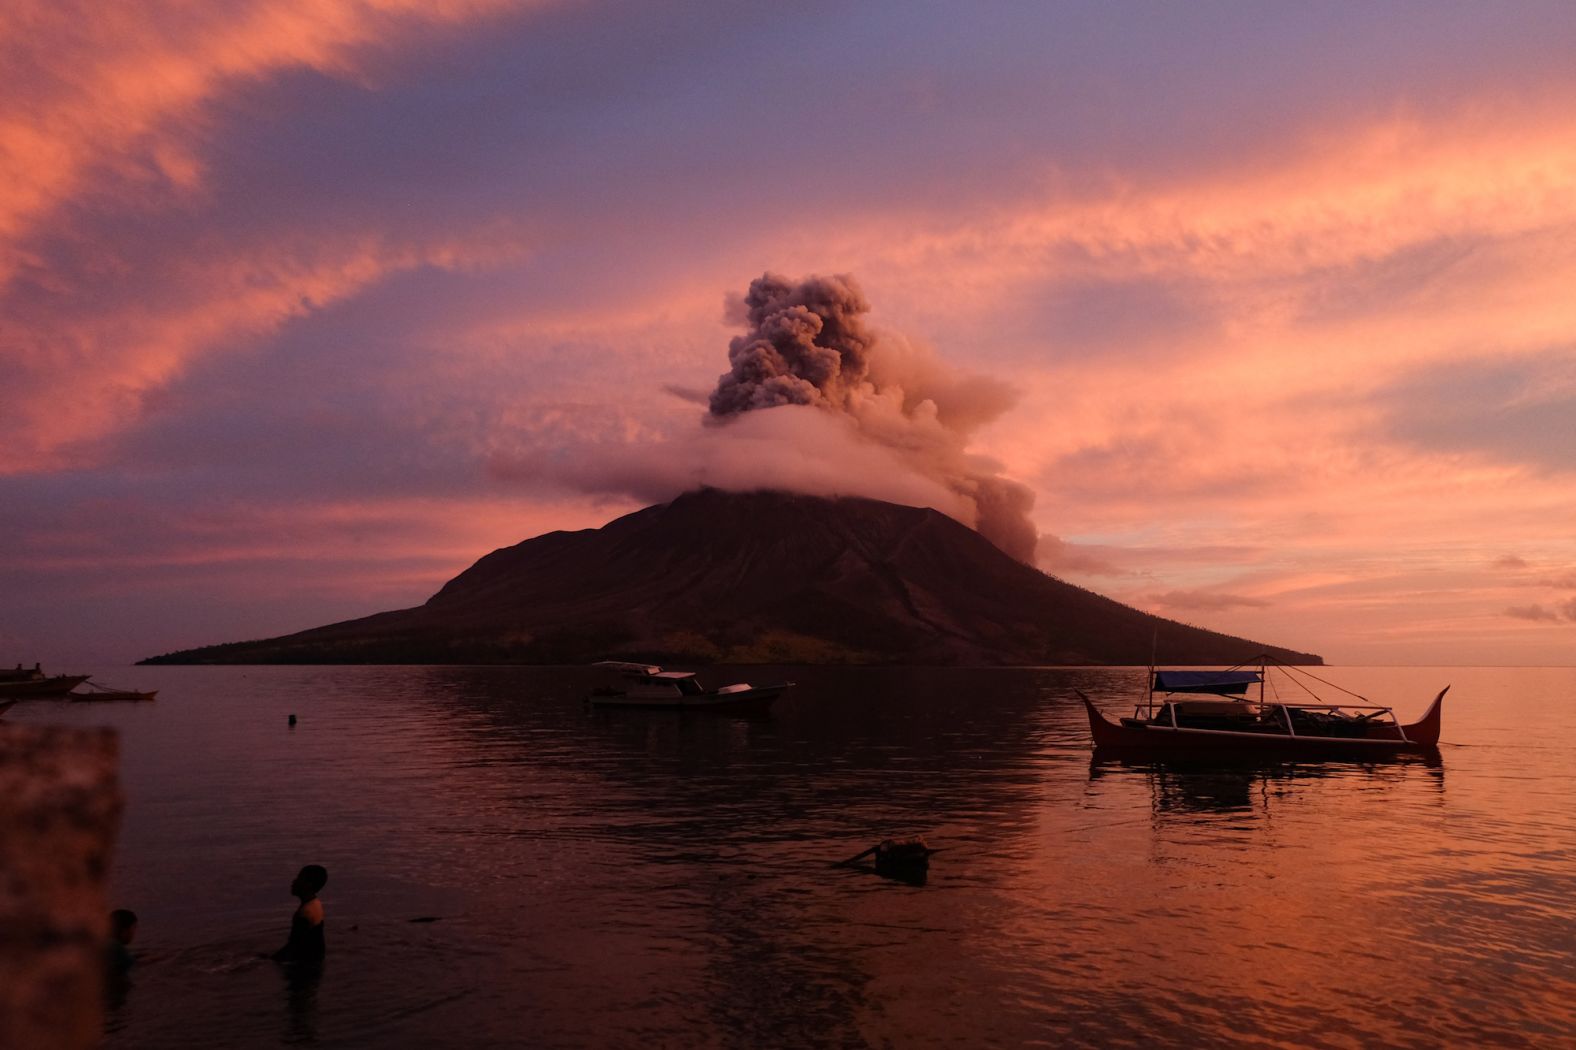 The Mount Ruang volcano erupts in Sitaro, Indonesia, on Friday, April 19. Authorities ordered hundreds of villagers to evacuate following <a href="https://www.cnn.com/2024/04/17/asia/indonesia-mount-ruang-volcano-eruption-intl-hnk/index.html" target="_blank">multiple eruptions</a>.